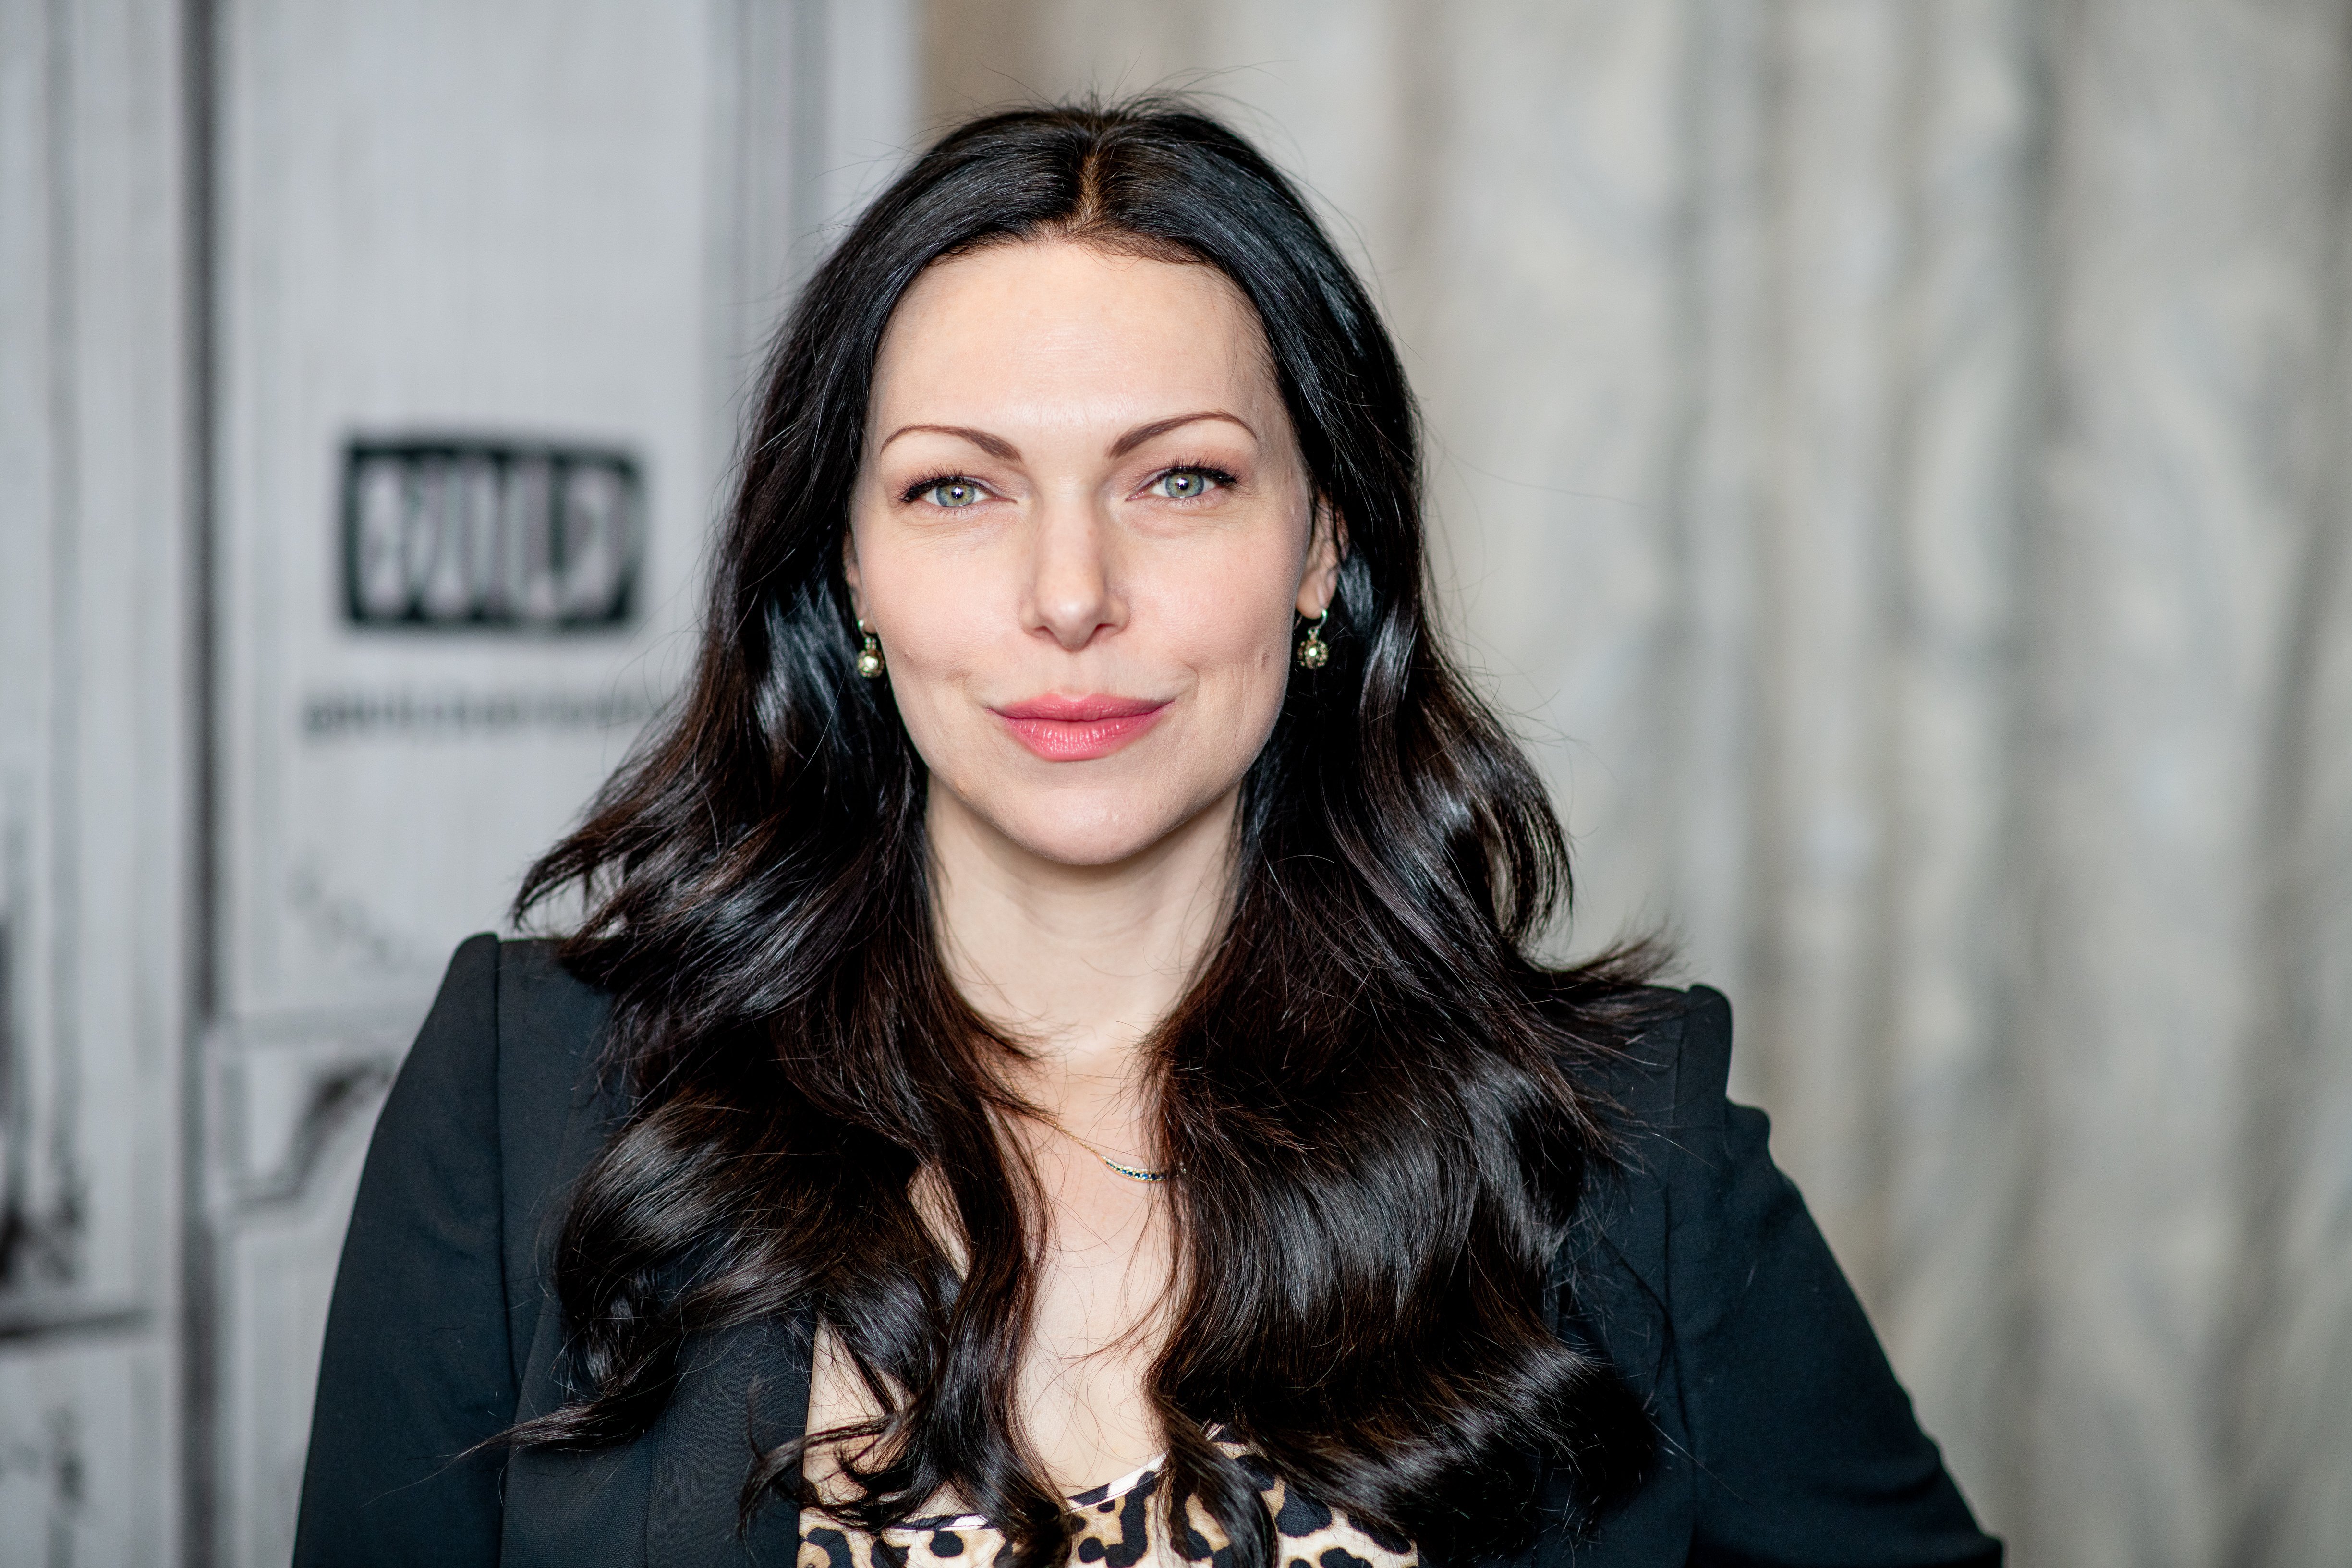 Laura Prepon discusses "Orange is the New Black" and her YouTube channel with the Build Series at Build Studio on November 27, 2018. | Photo: GettyImages